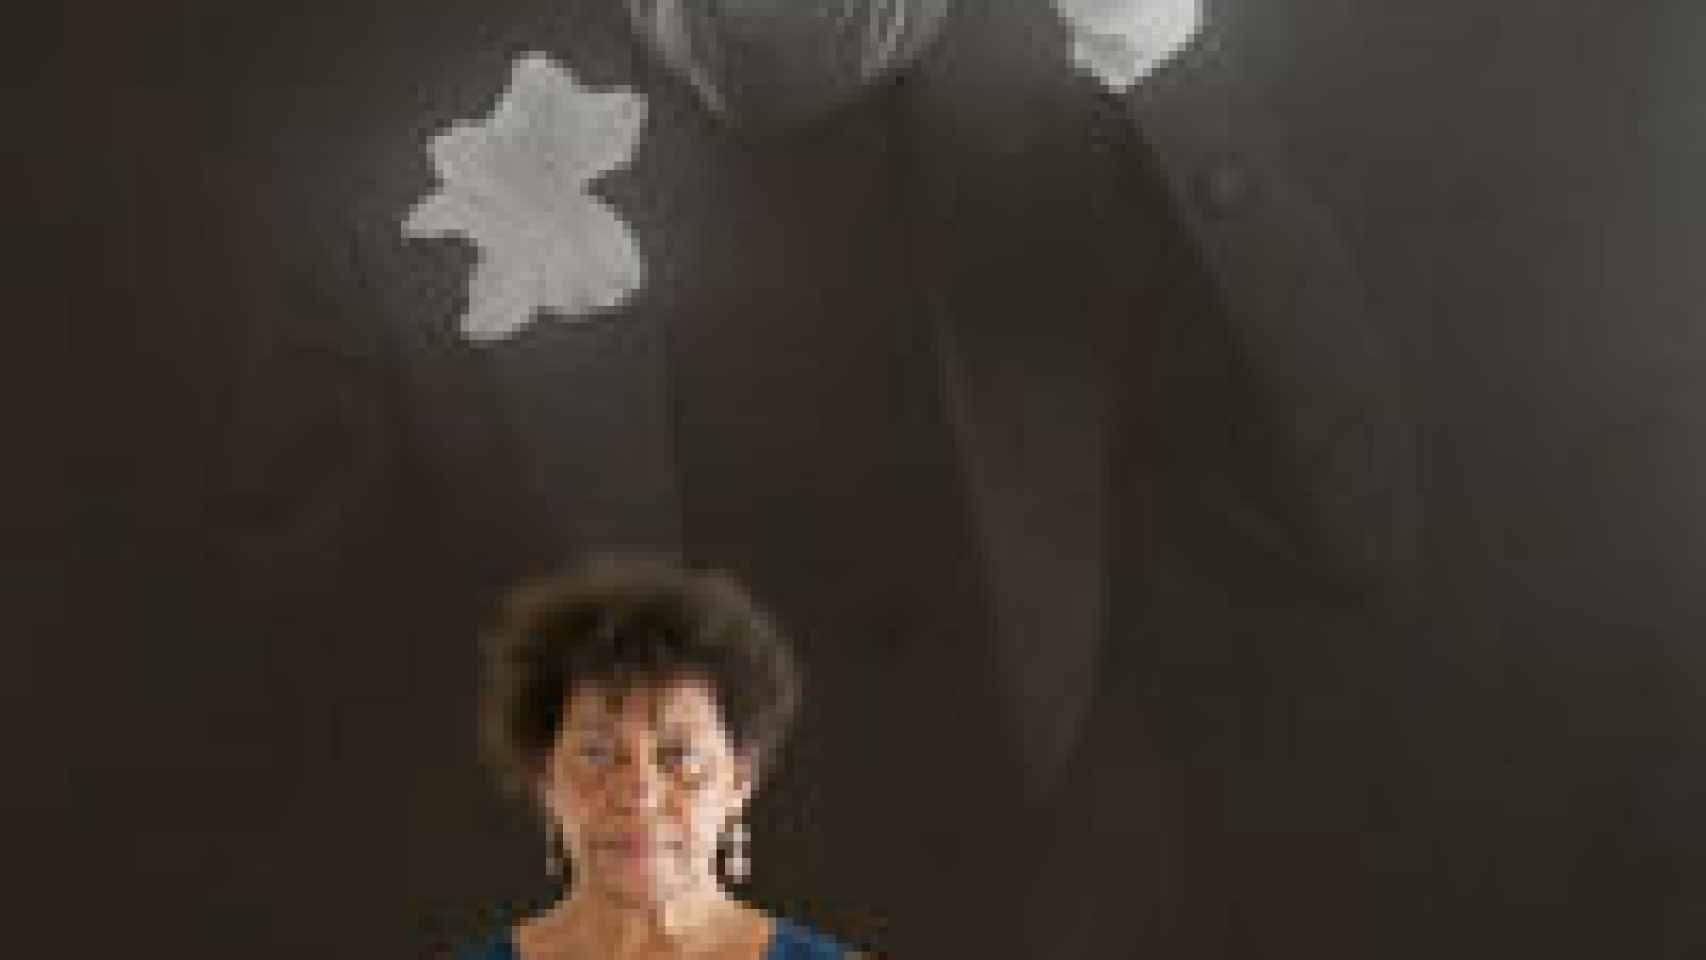 Image: Carrie Mae Weems cambia la historia